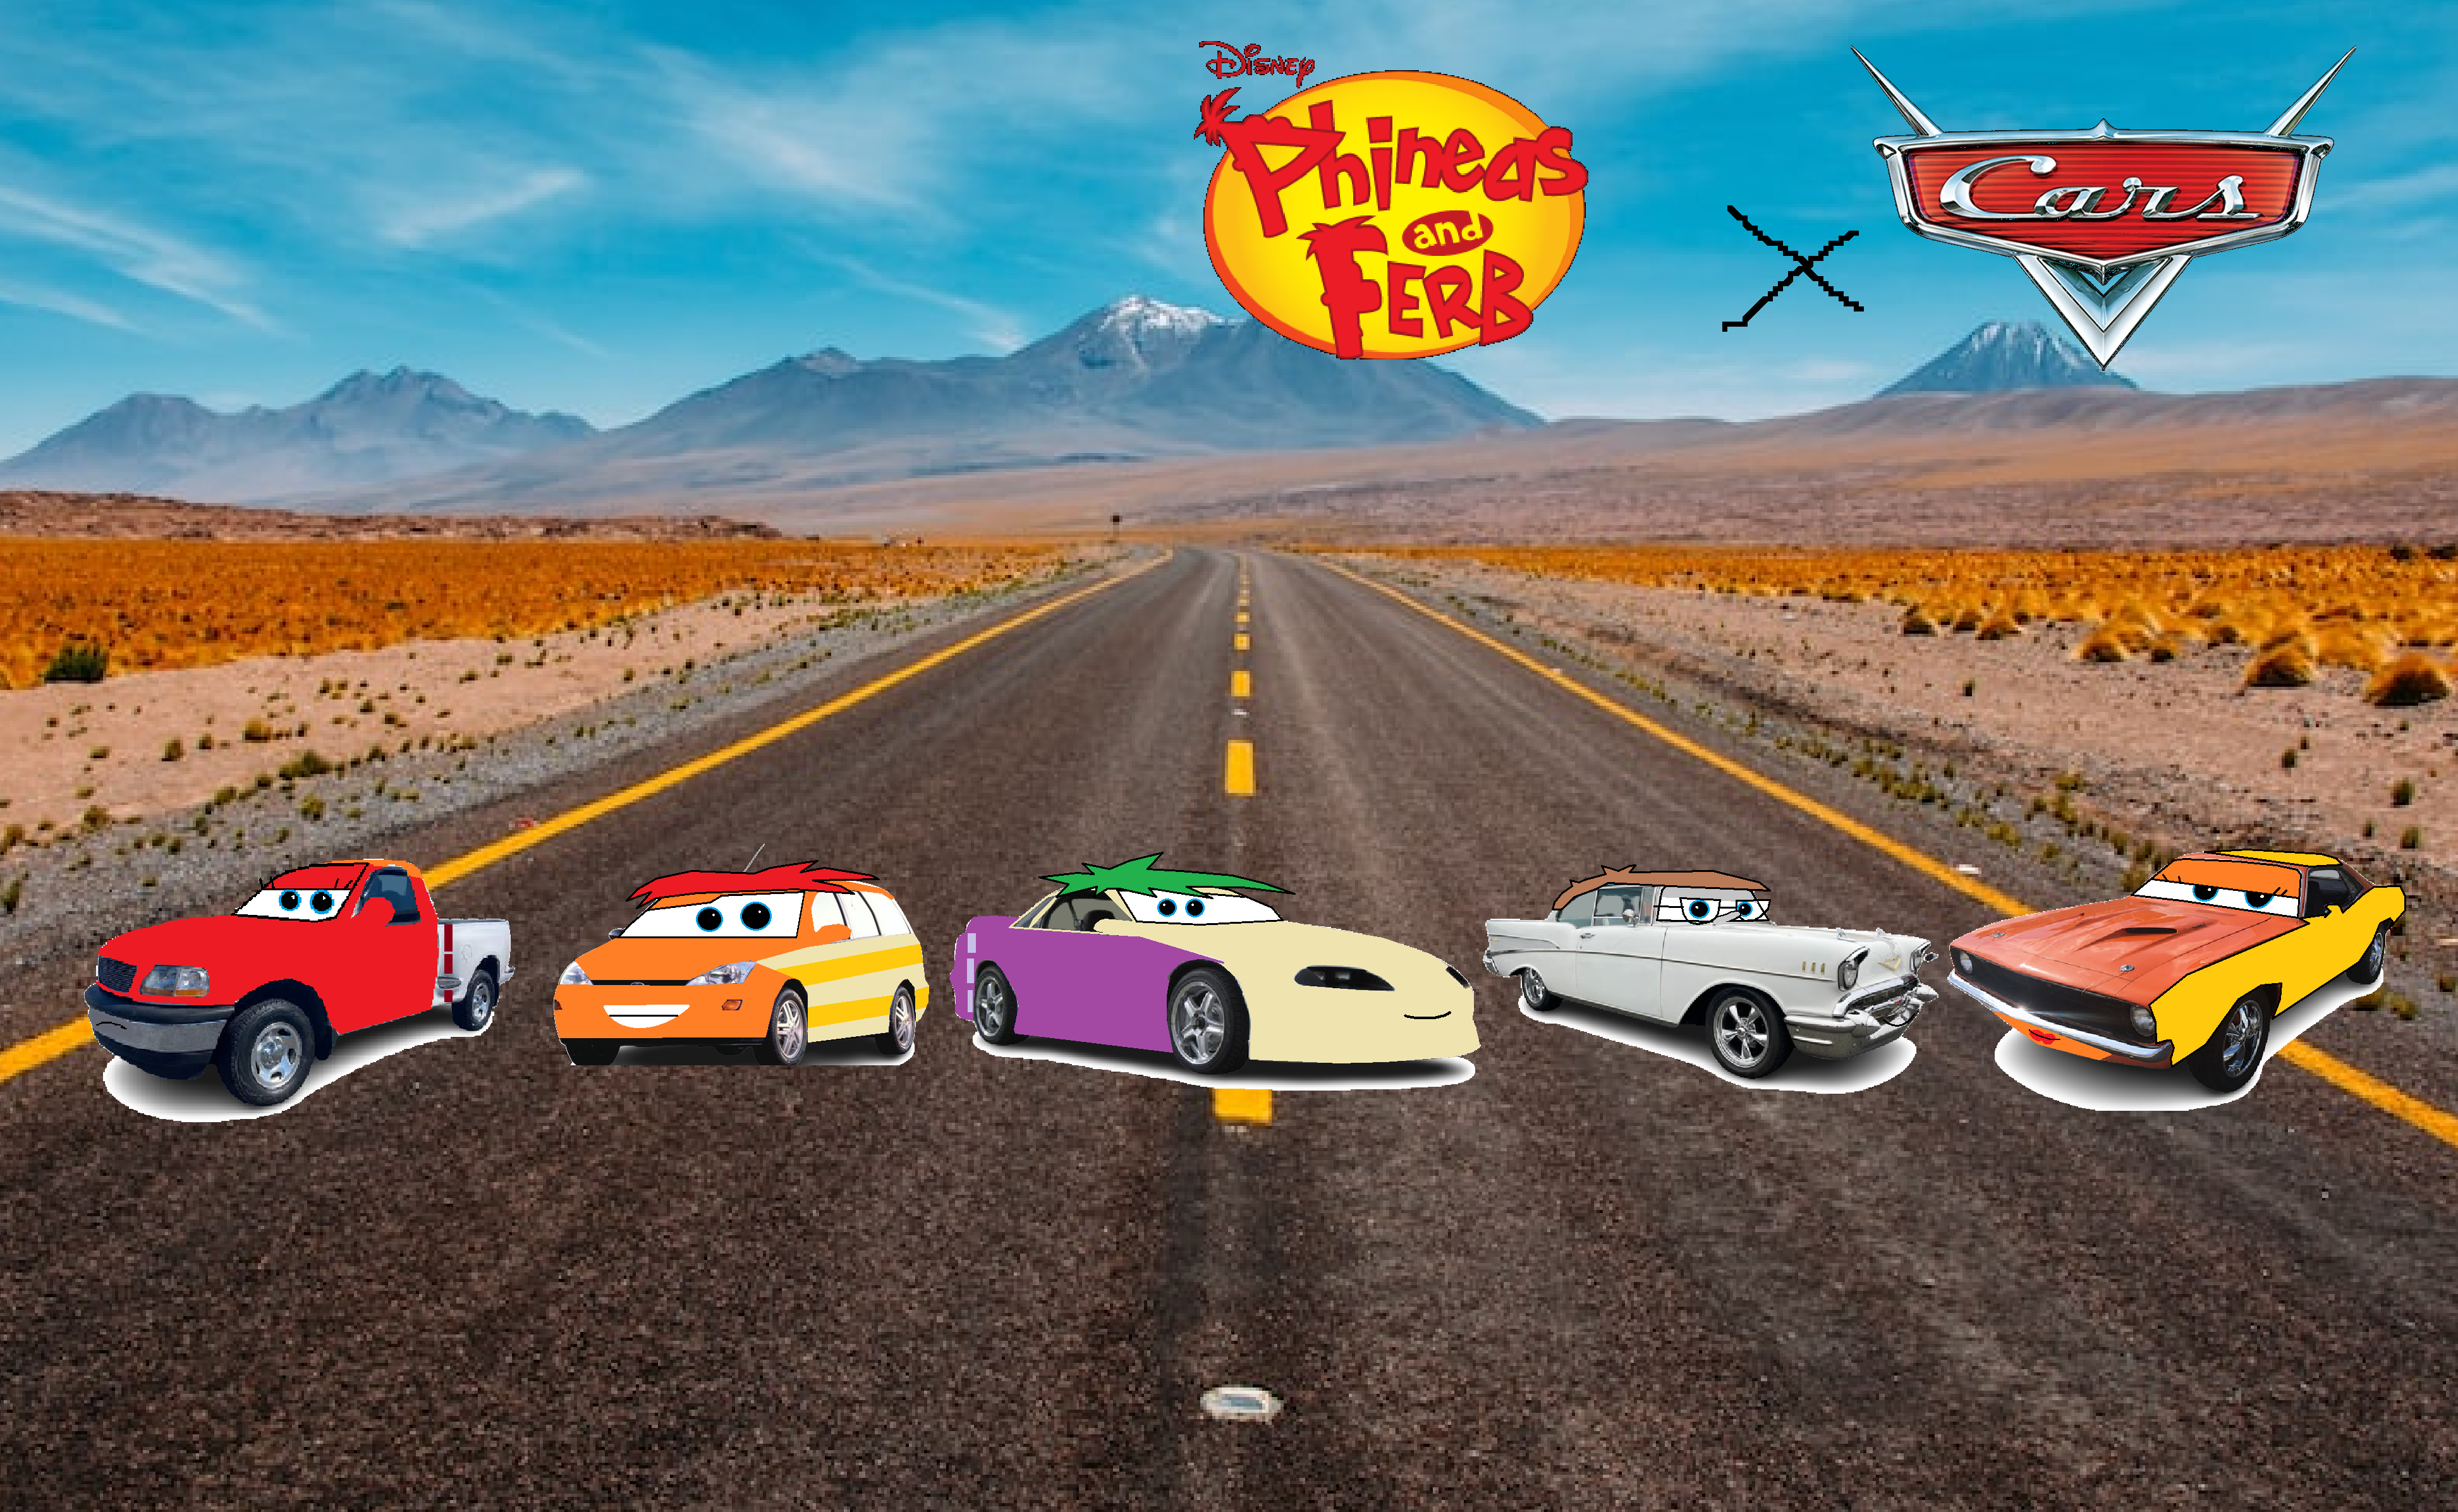 Phineas and Ferb Characters in Cars style.